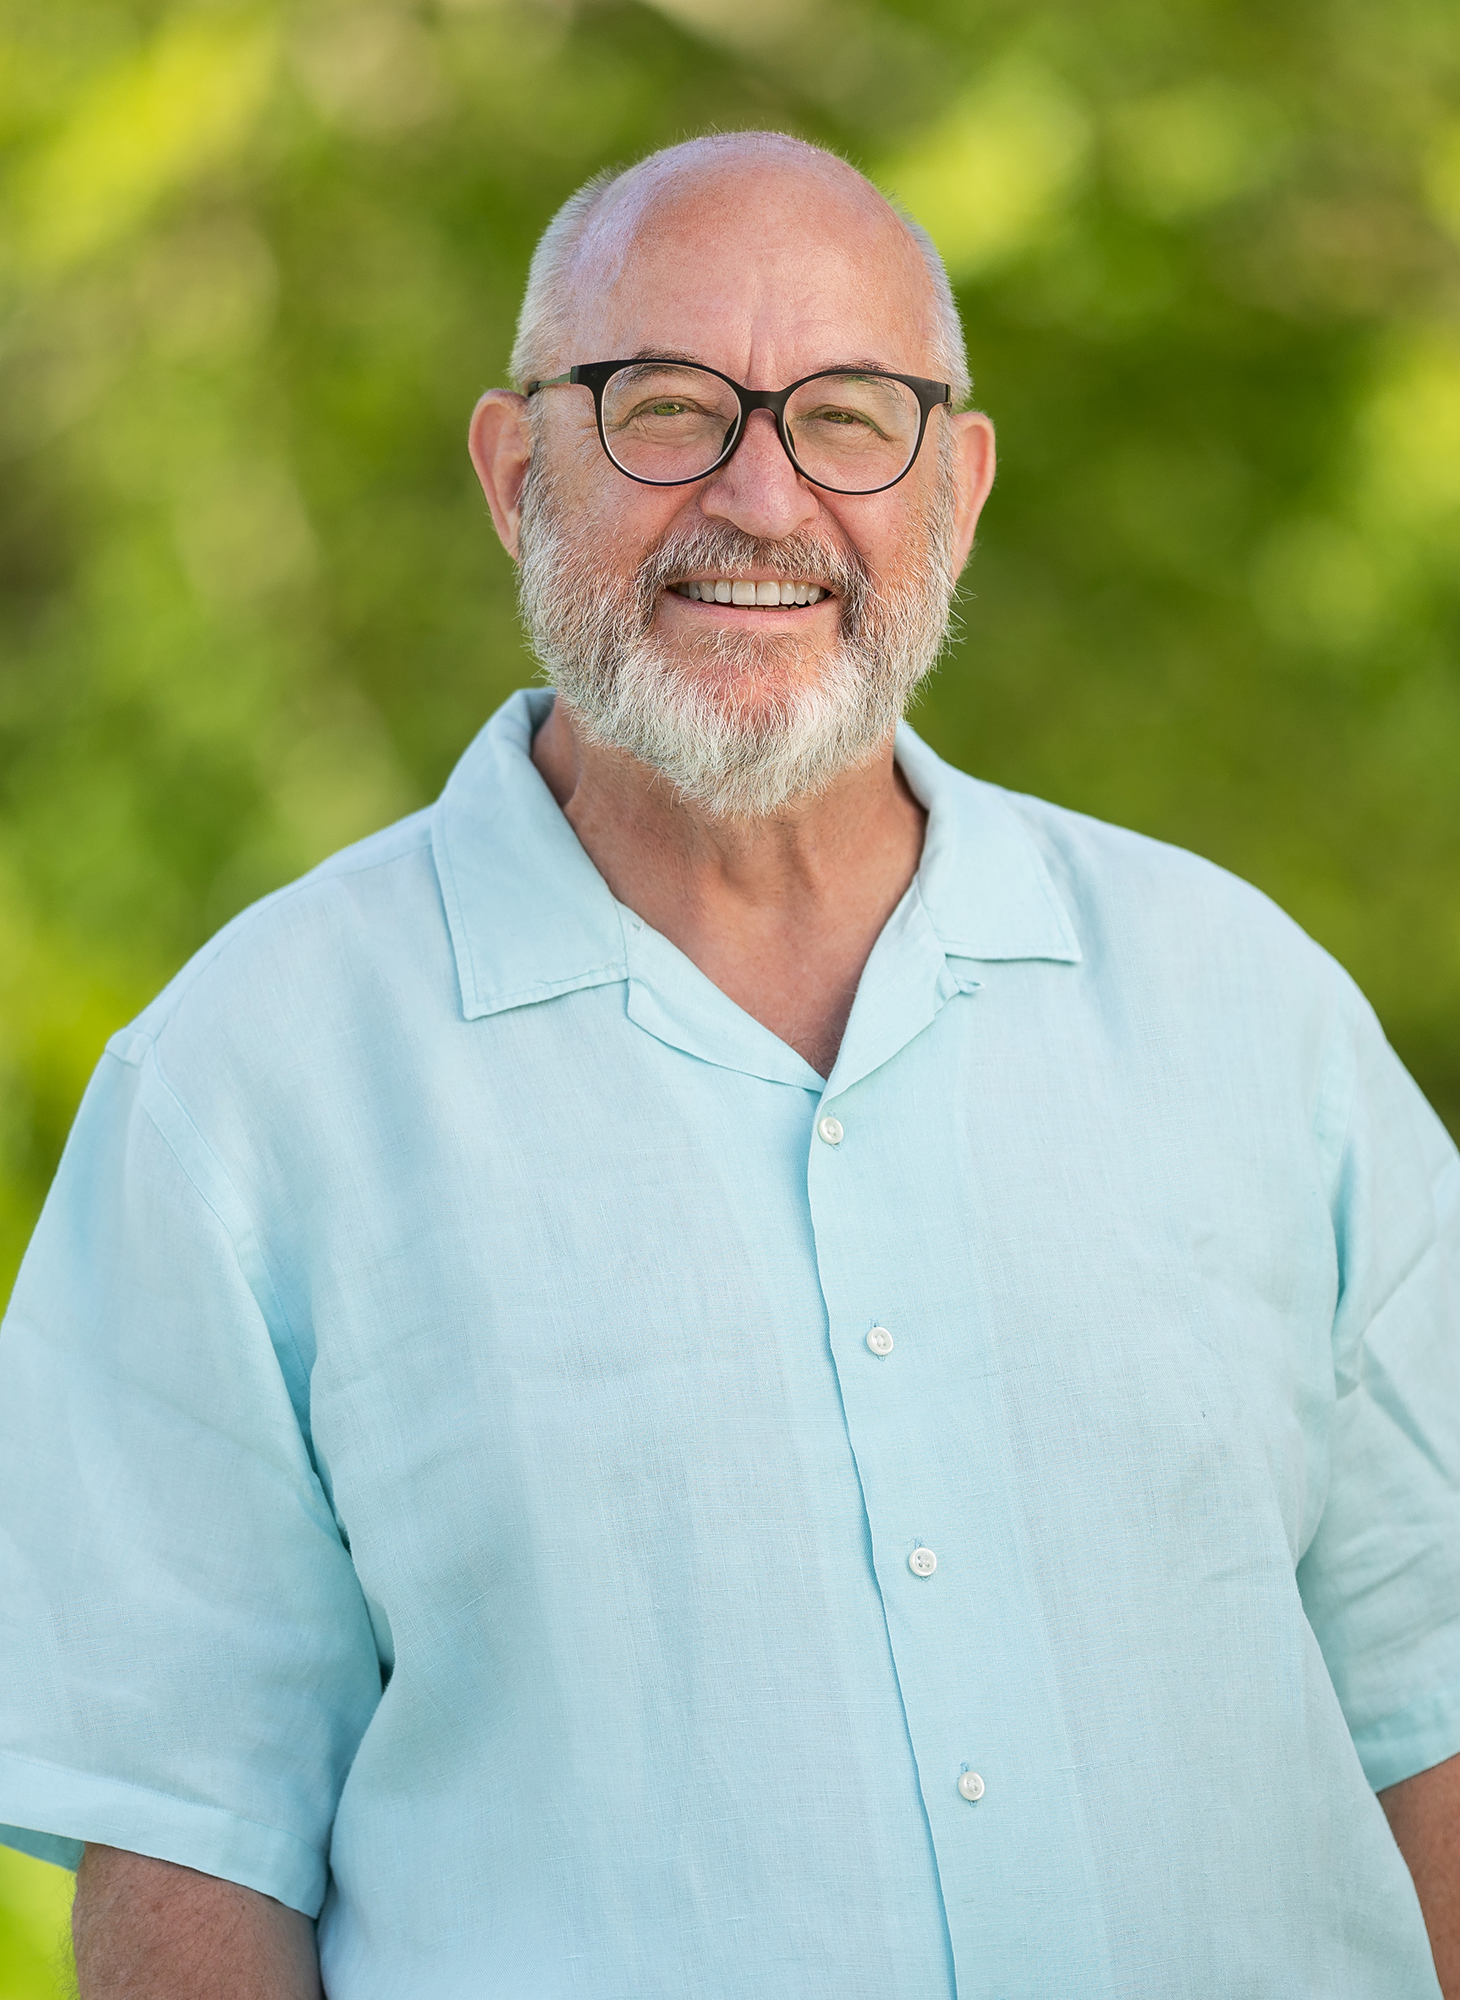 A man with a white beard, black glasses and blue button up shirt in front of a green background